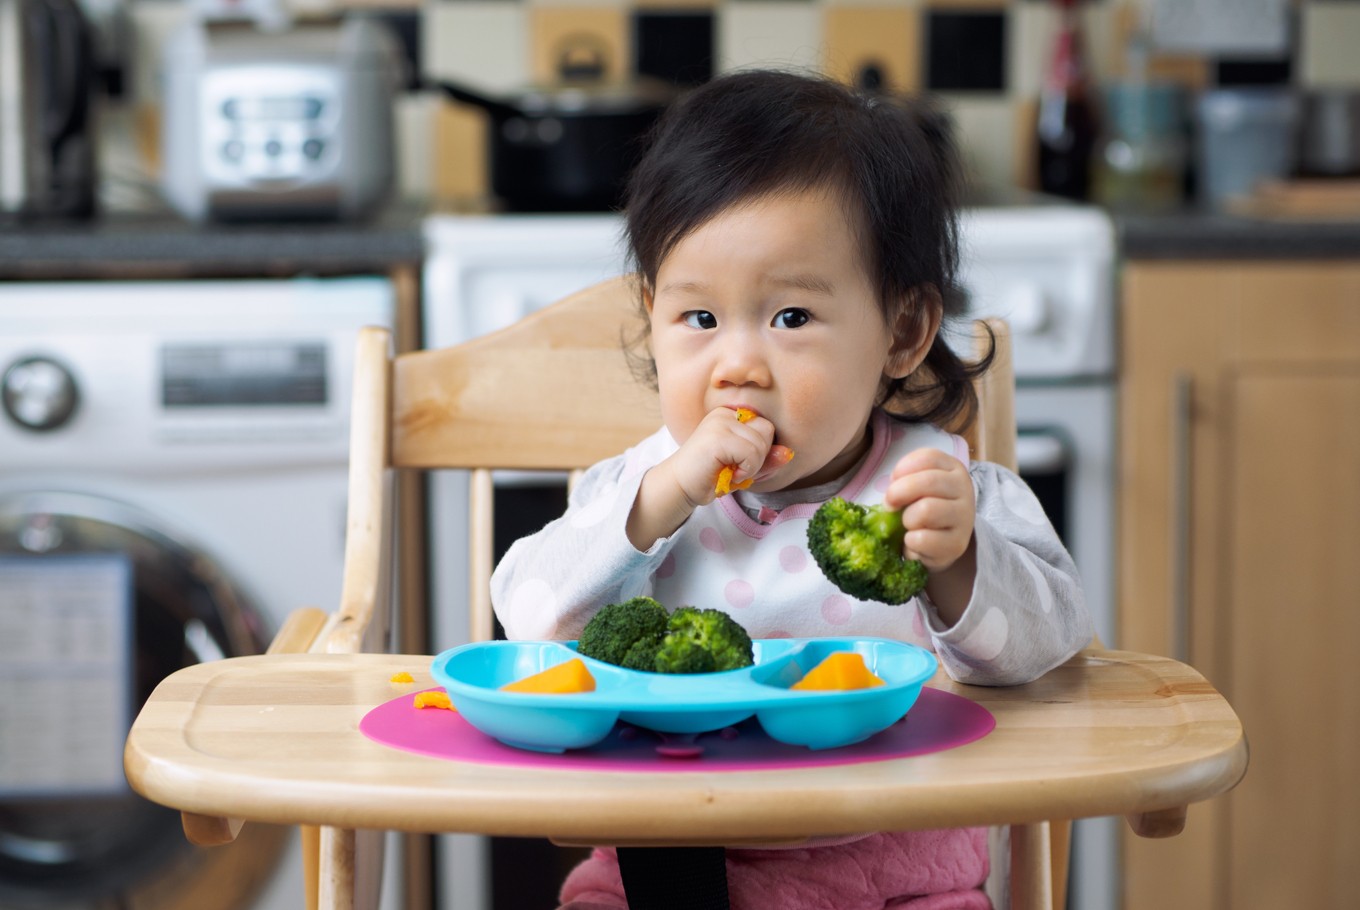 Asian baby boy 6 months old eating with Baby Led Weaning (BLW